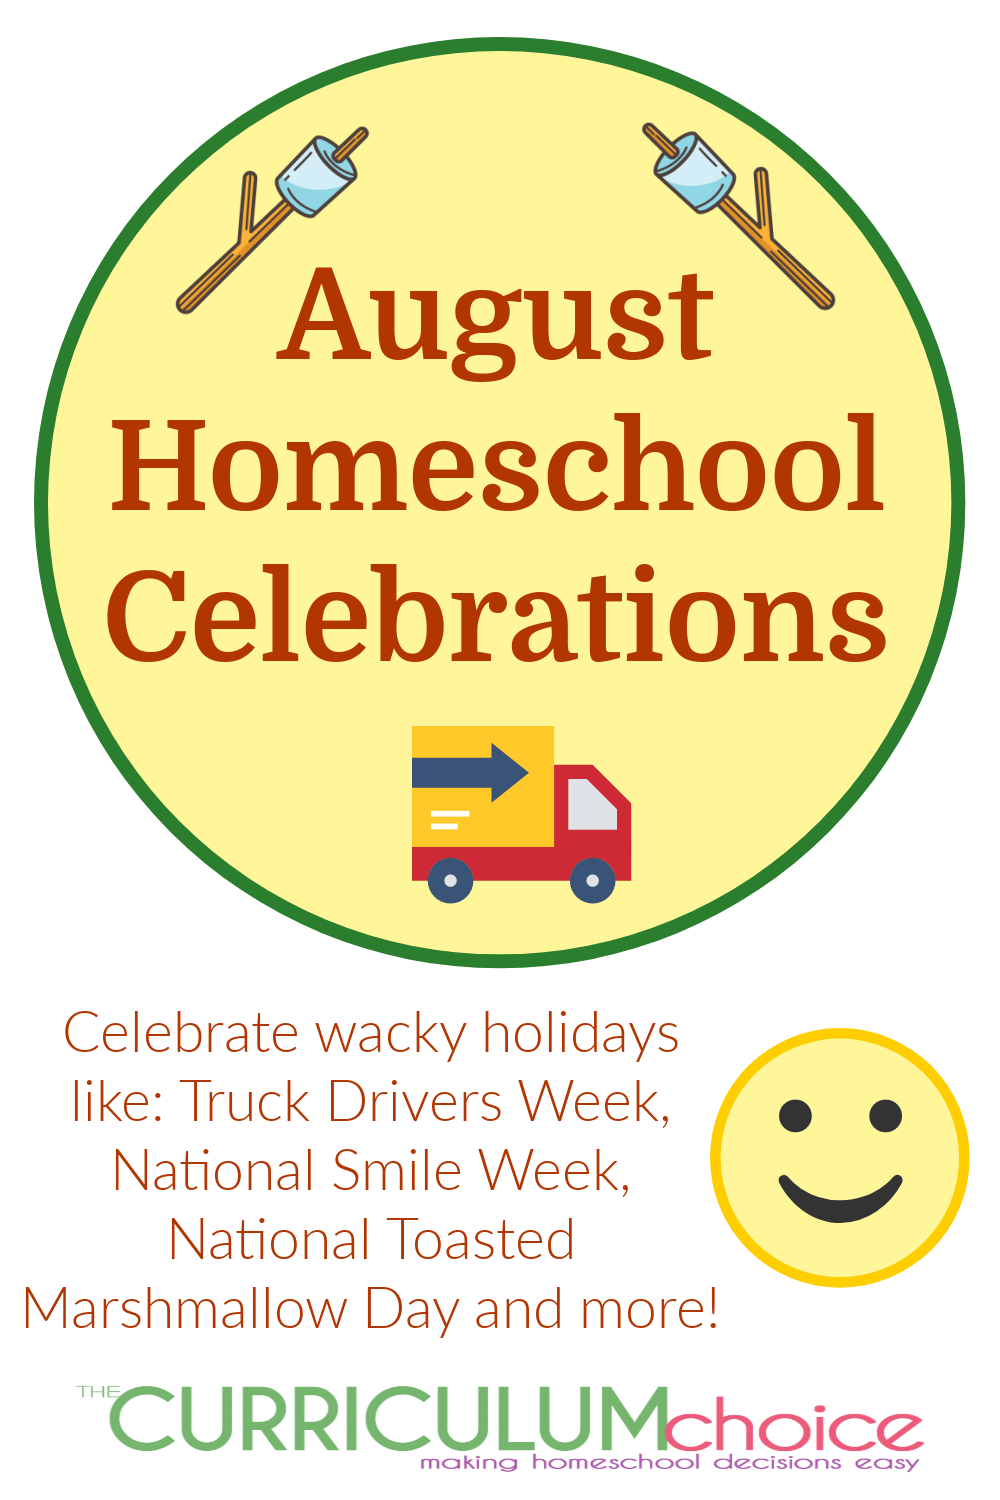 Enjoy August homeschool celebrations like National Smile Week, and National Toasted Marshmallow Day with your loved ones this month!